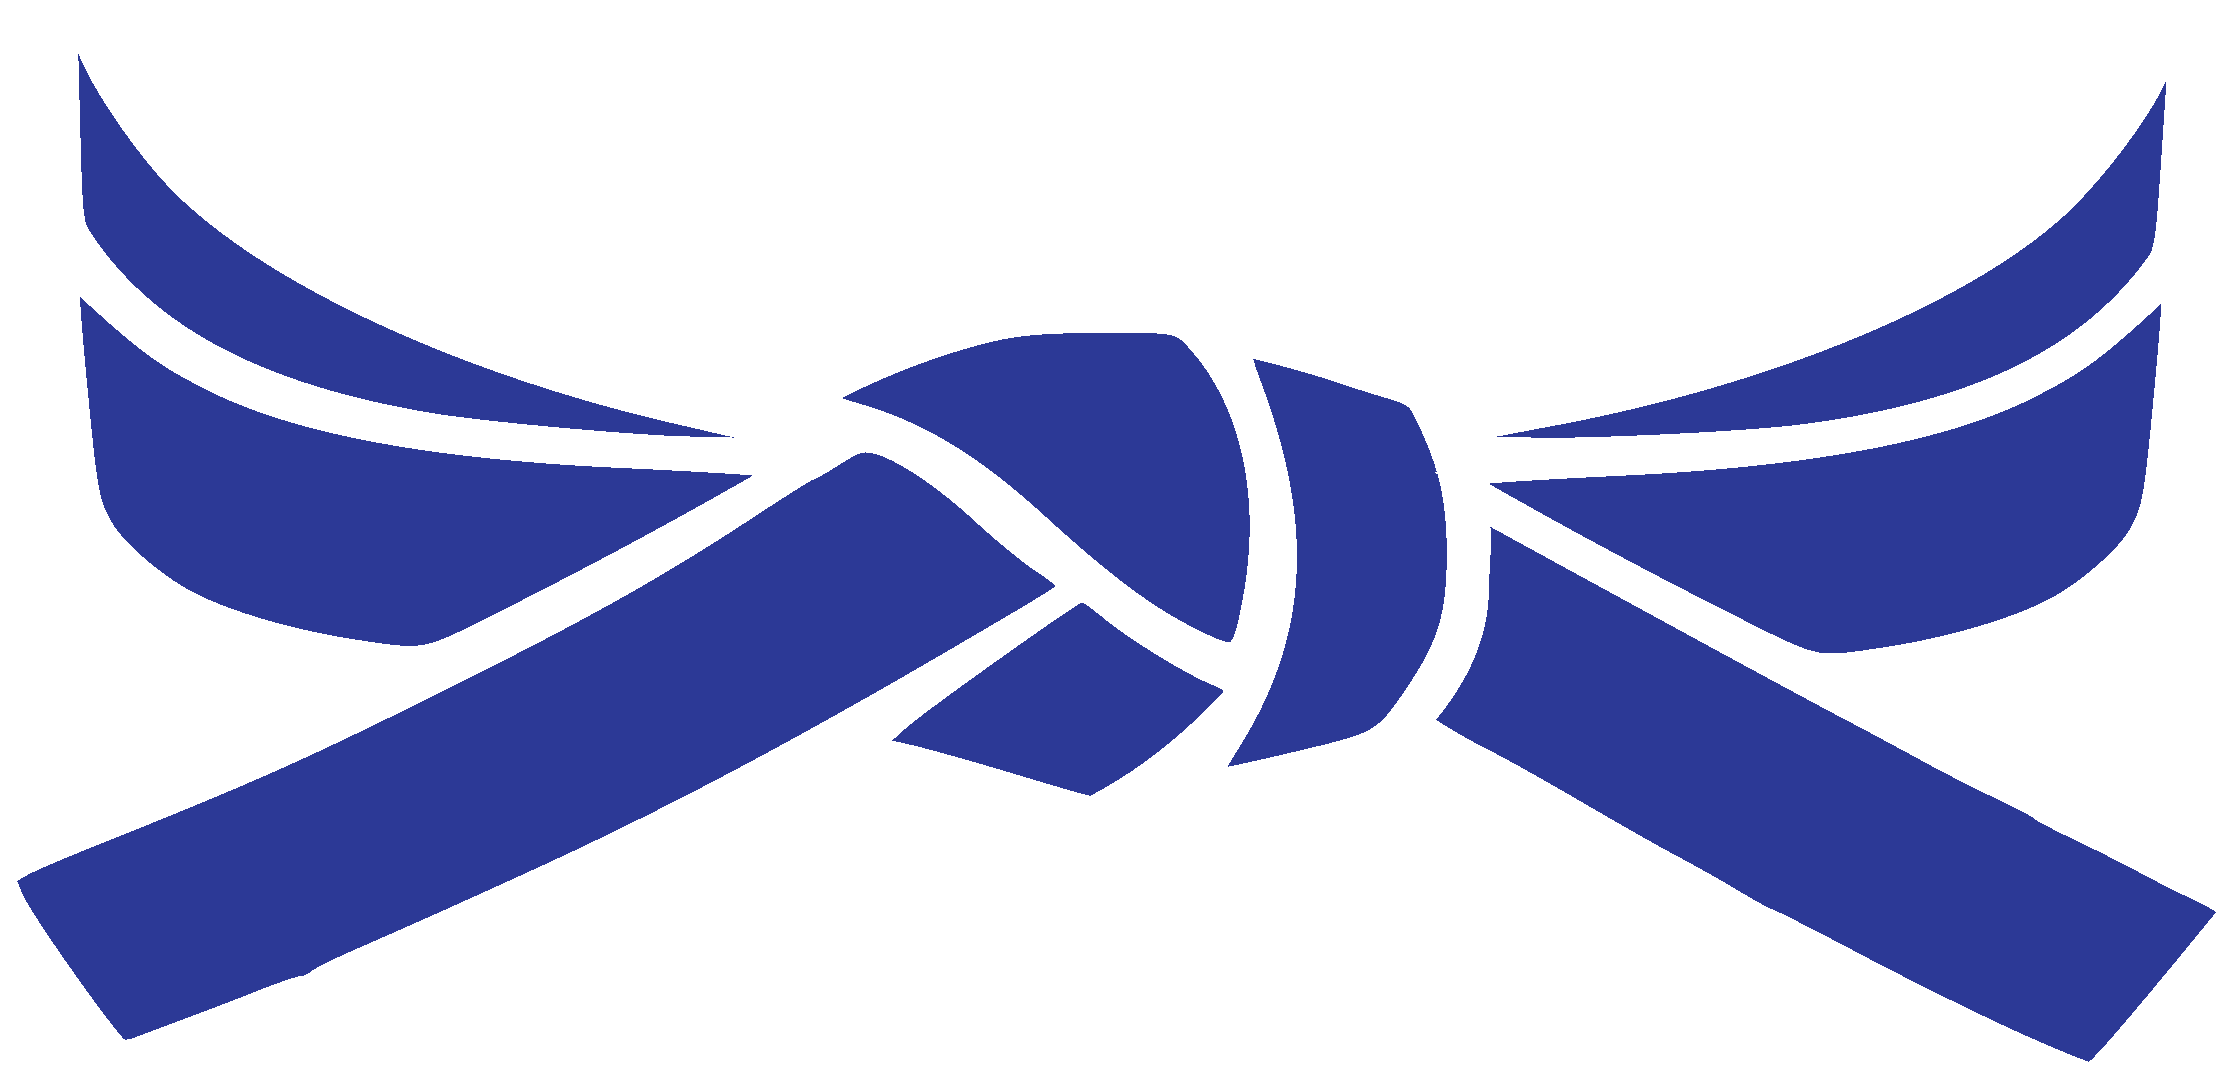 A Blue Ribbon With White Outline